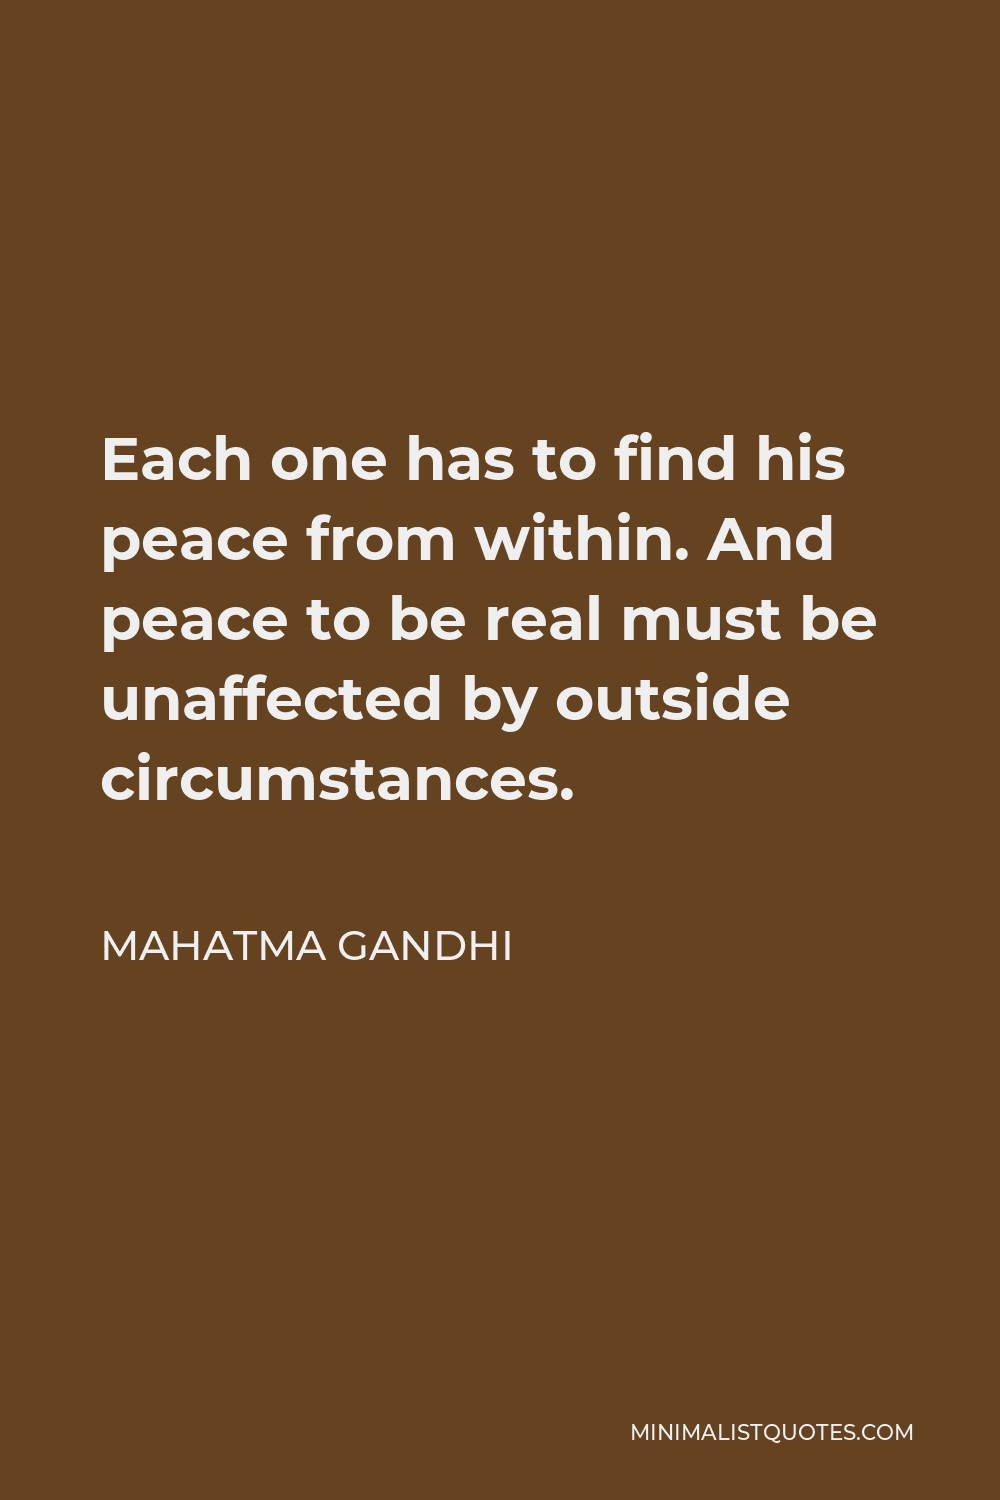 Mahatma Gandhi Quote - Each one has to find his peace from within. And peace to be real must be unaffected by outside circumstances.